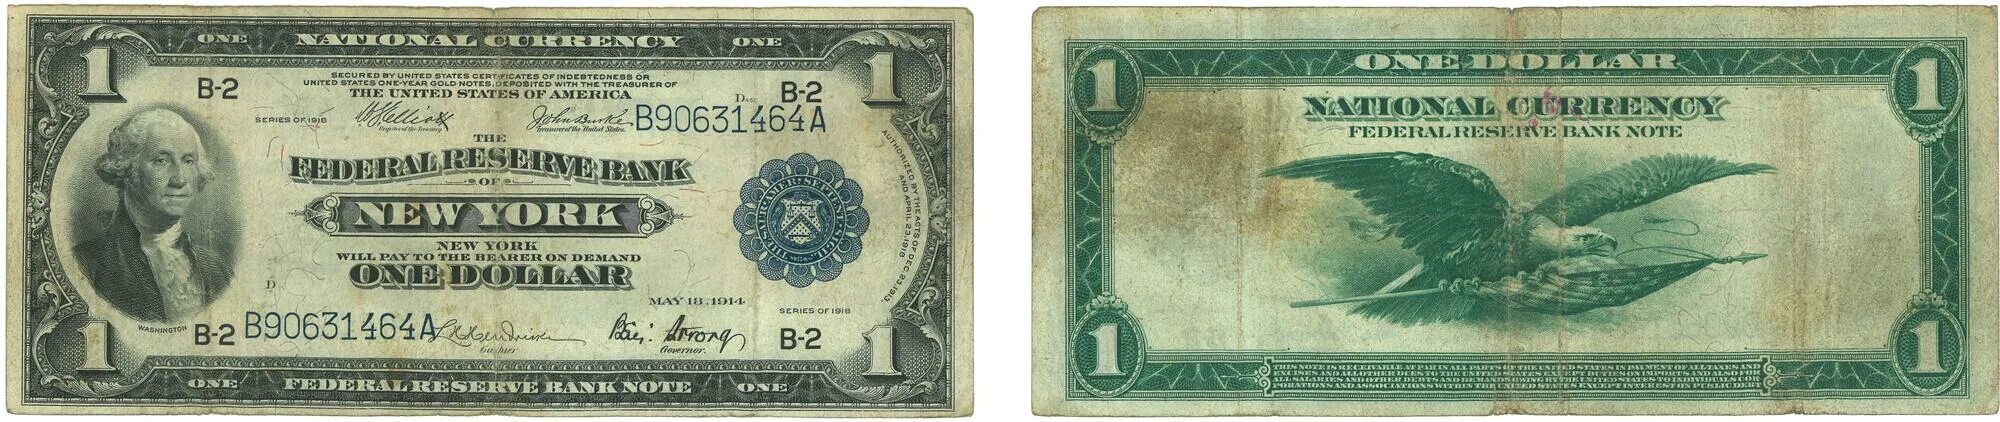 T me bank notes. 1918 $5,000 Federal Reserve Note. 1,000 Federal Reserve Note. 1 Доллар Миннеаполис. Sterling Reserve Bank USA.